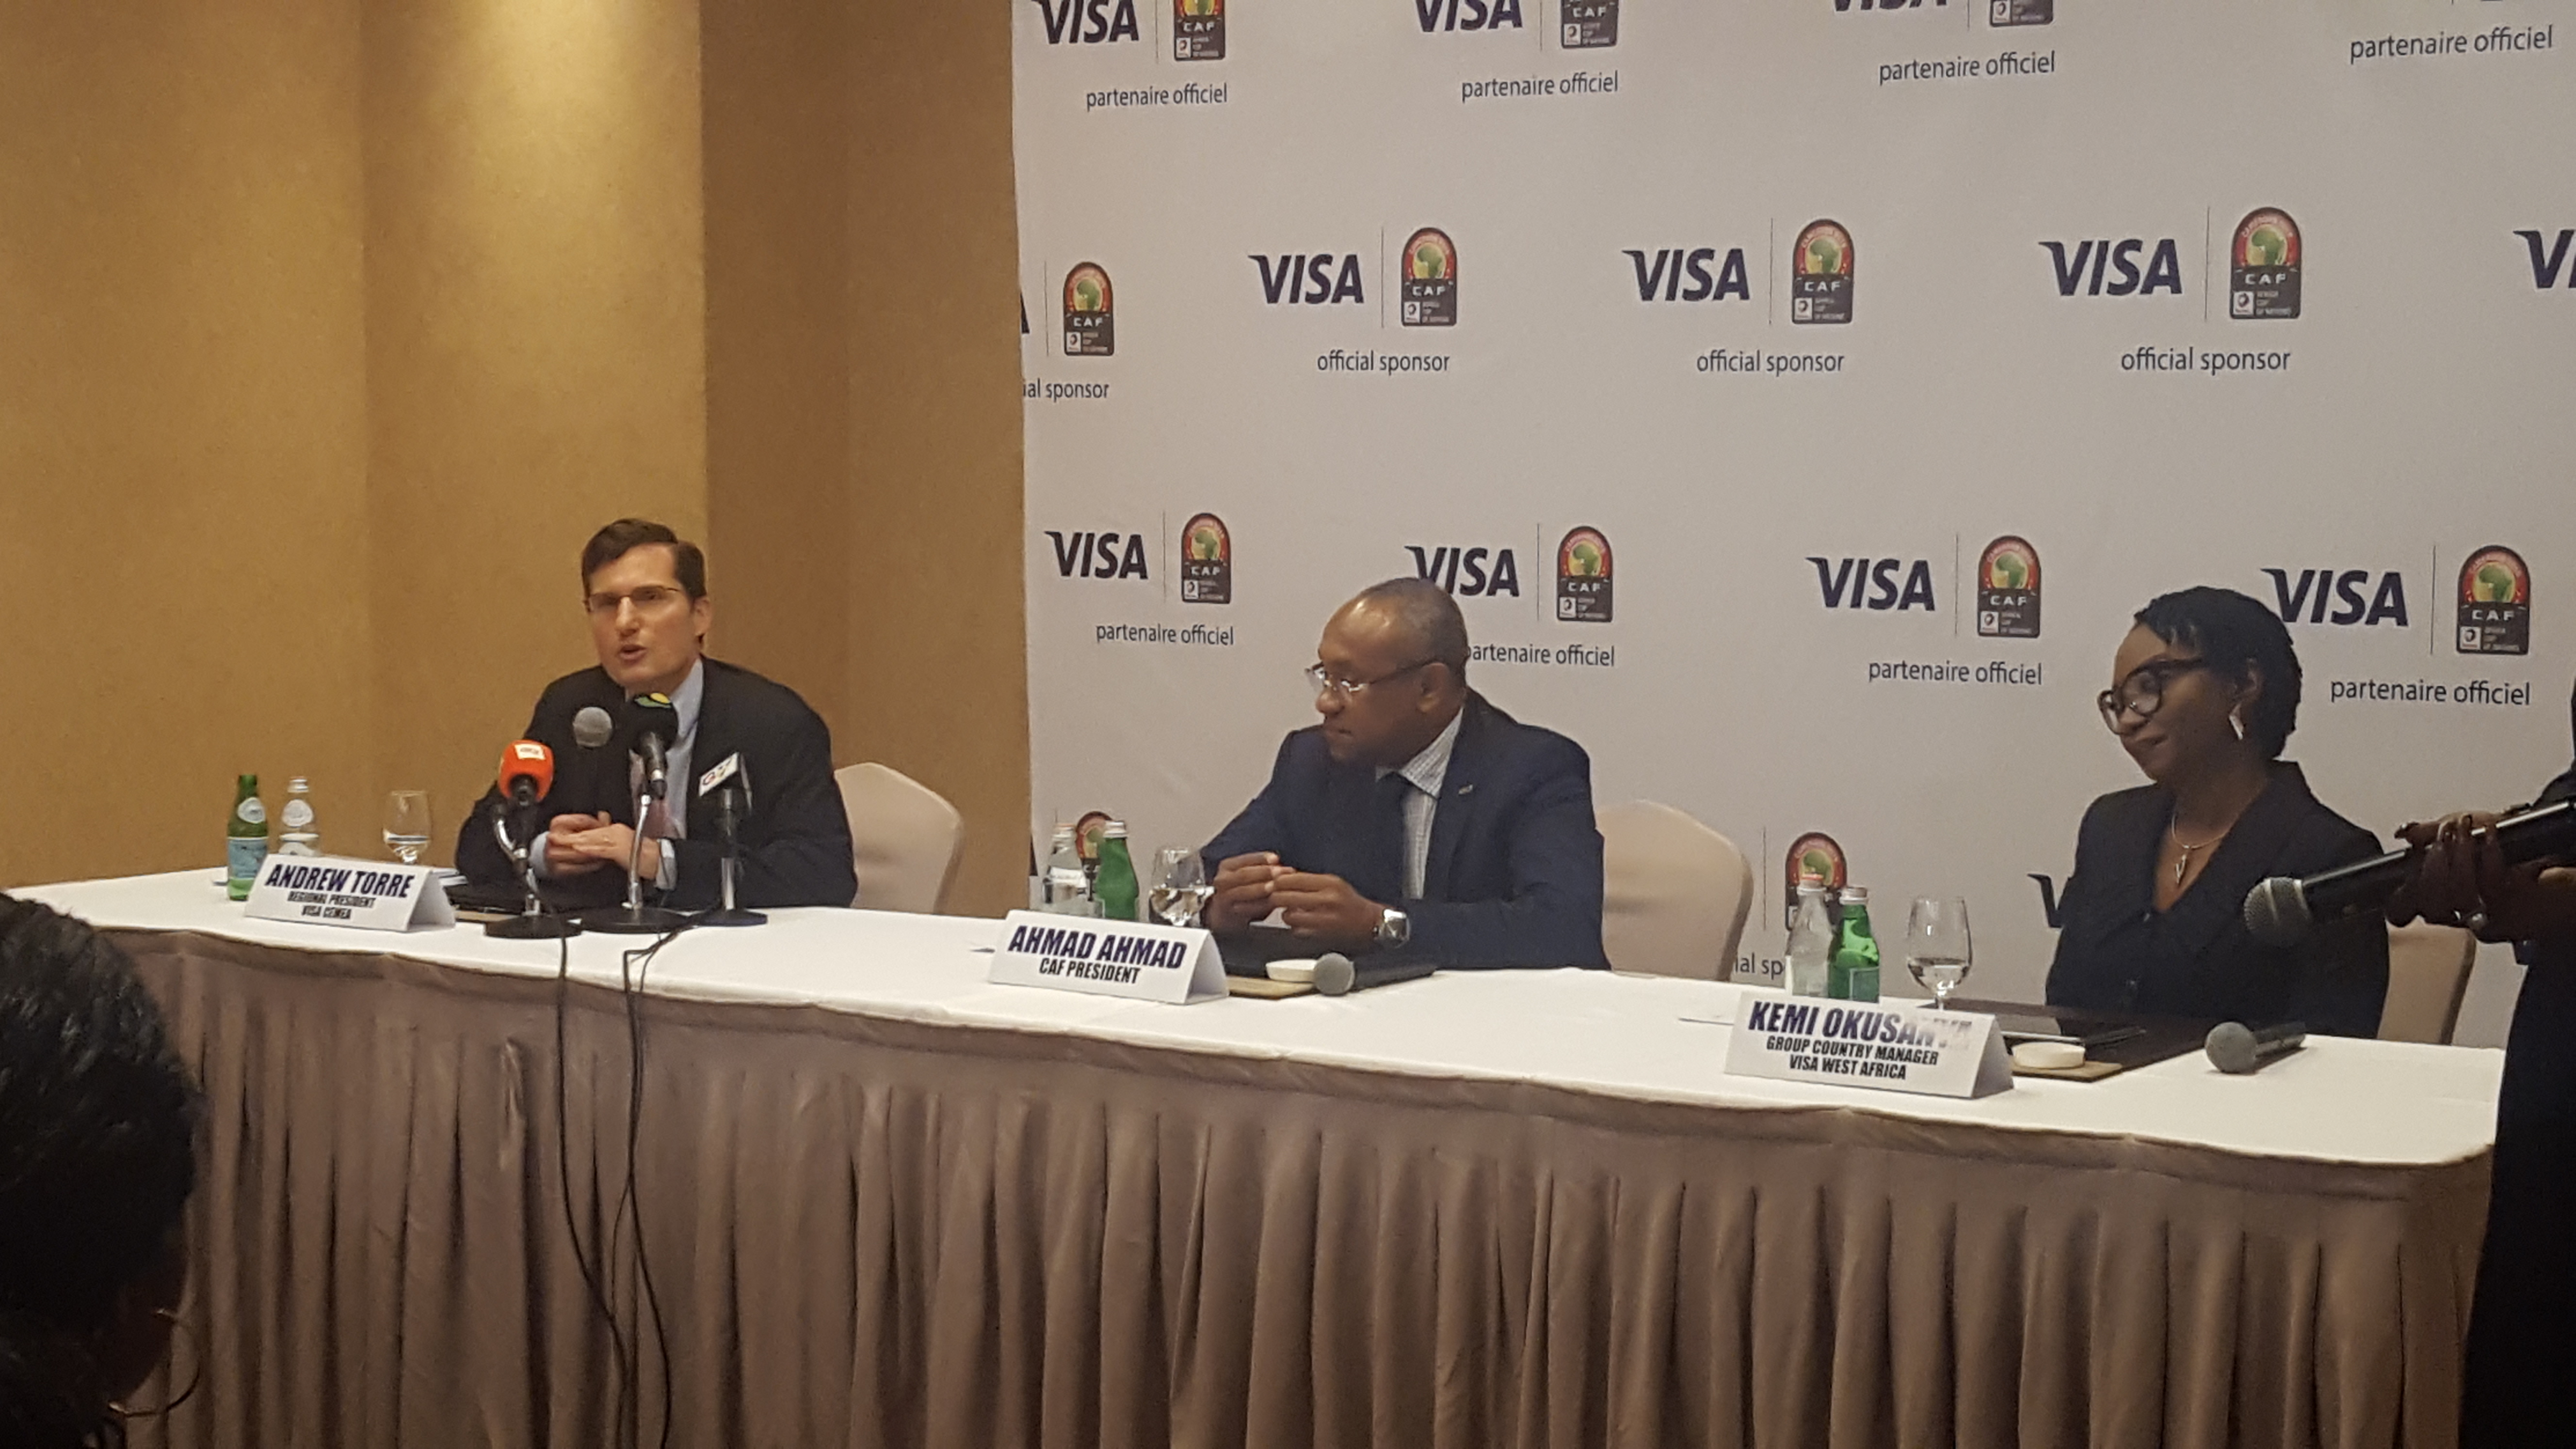 From Left:

Andrew Torre (Regional President, Central & Eastern Europe, Middle East and Africa (CEMEA), Visa), Ahmad Ahmad (CAF President), Kemi Okusanya (Group Country Manager, Visa West Africa)